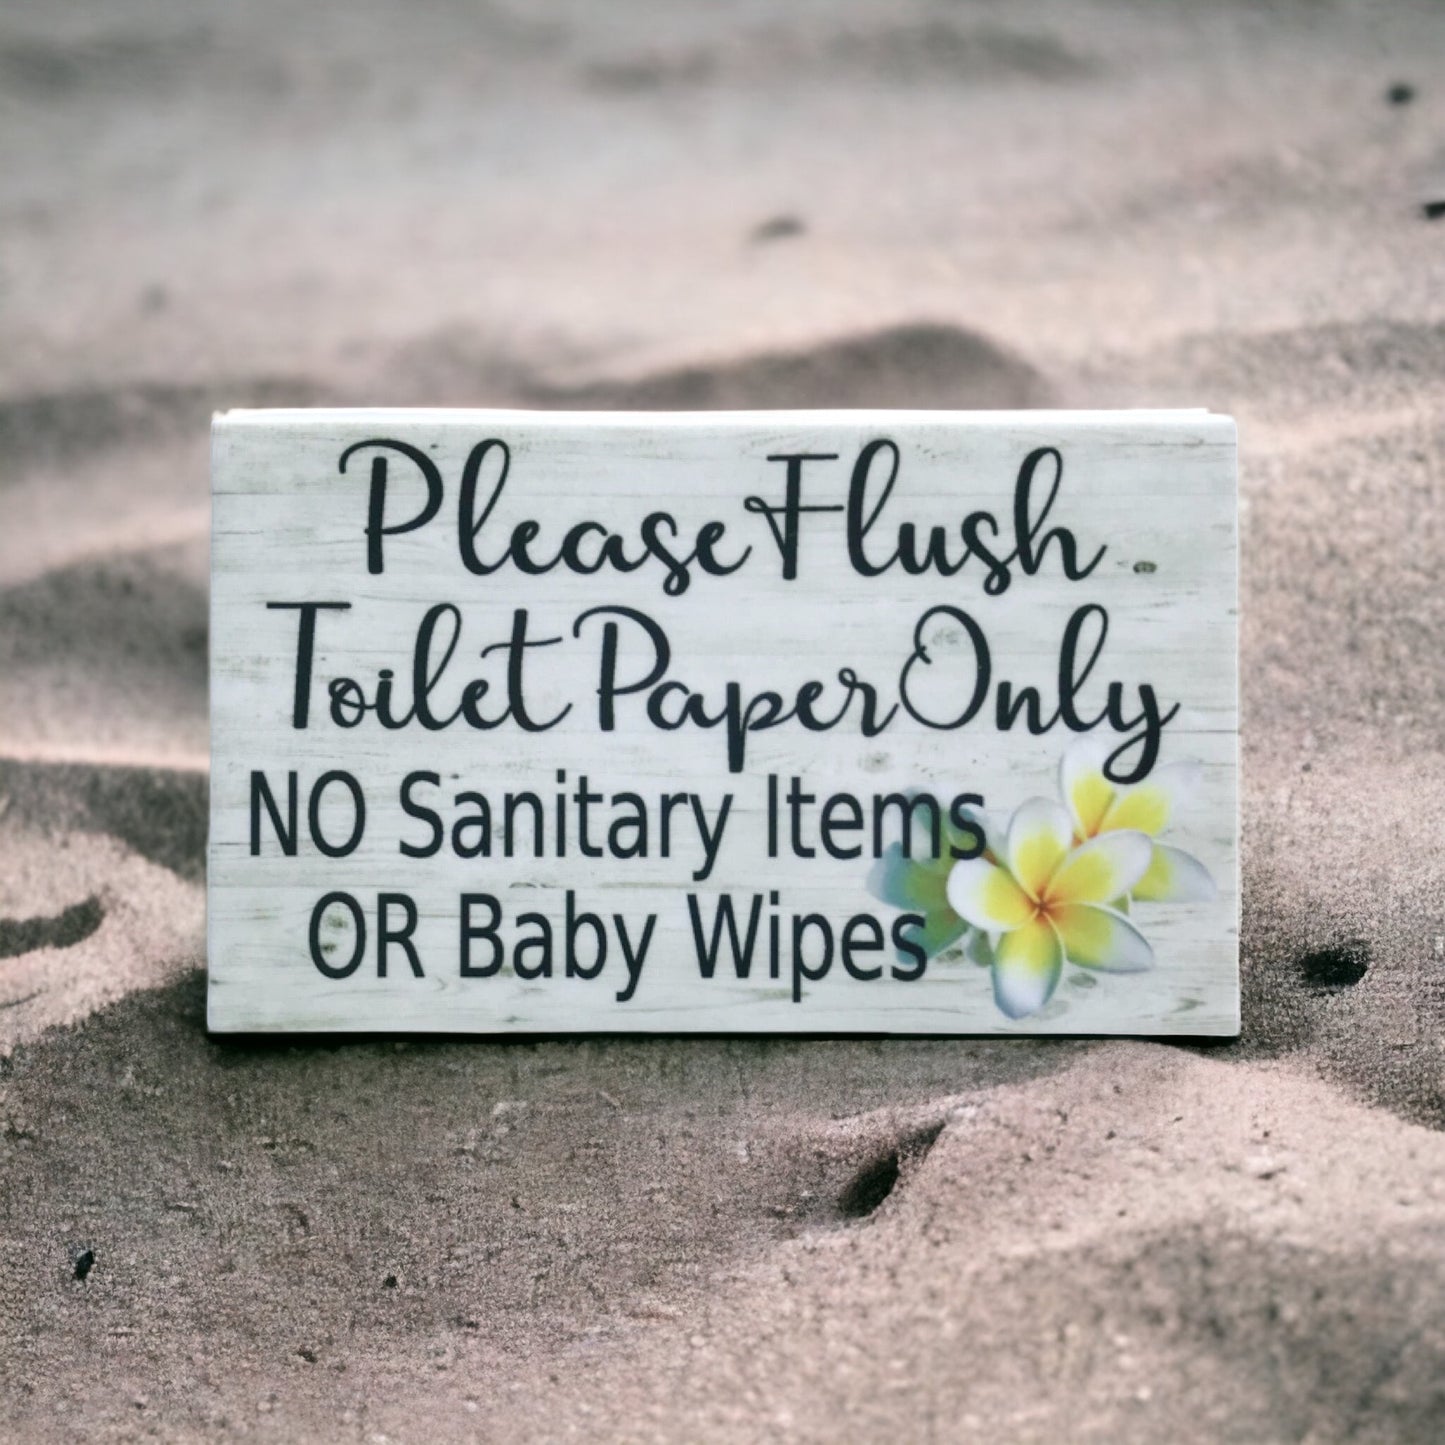 Flush Toilet Paper Only No Sanitary Frangipani Sign - The Renmy Store Homewares & Gifts 